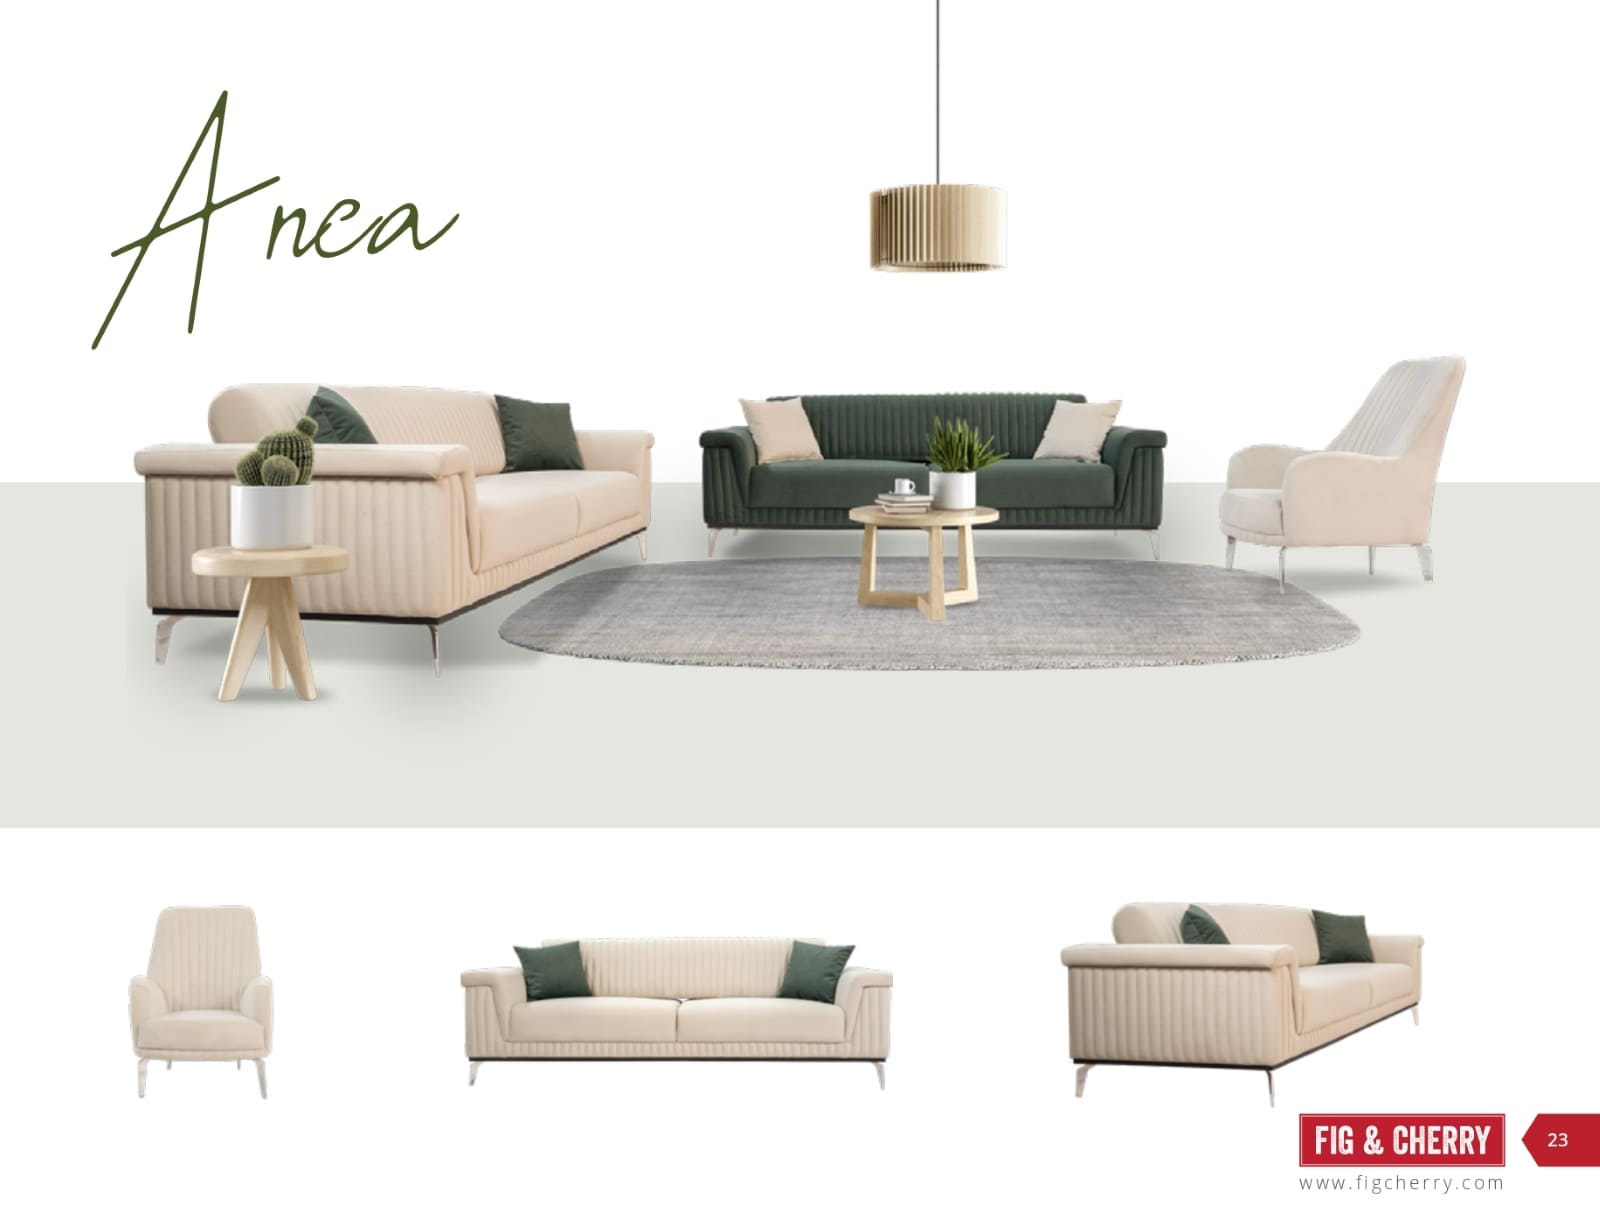 Fig & Cherry Indoor Collection (Sofas and Sectionals) Catalog (23)